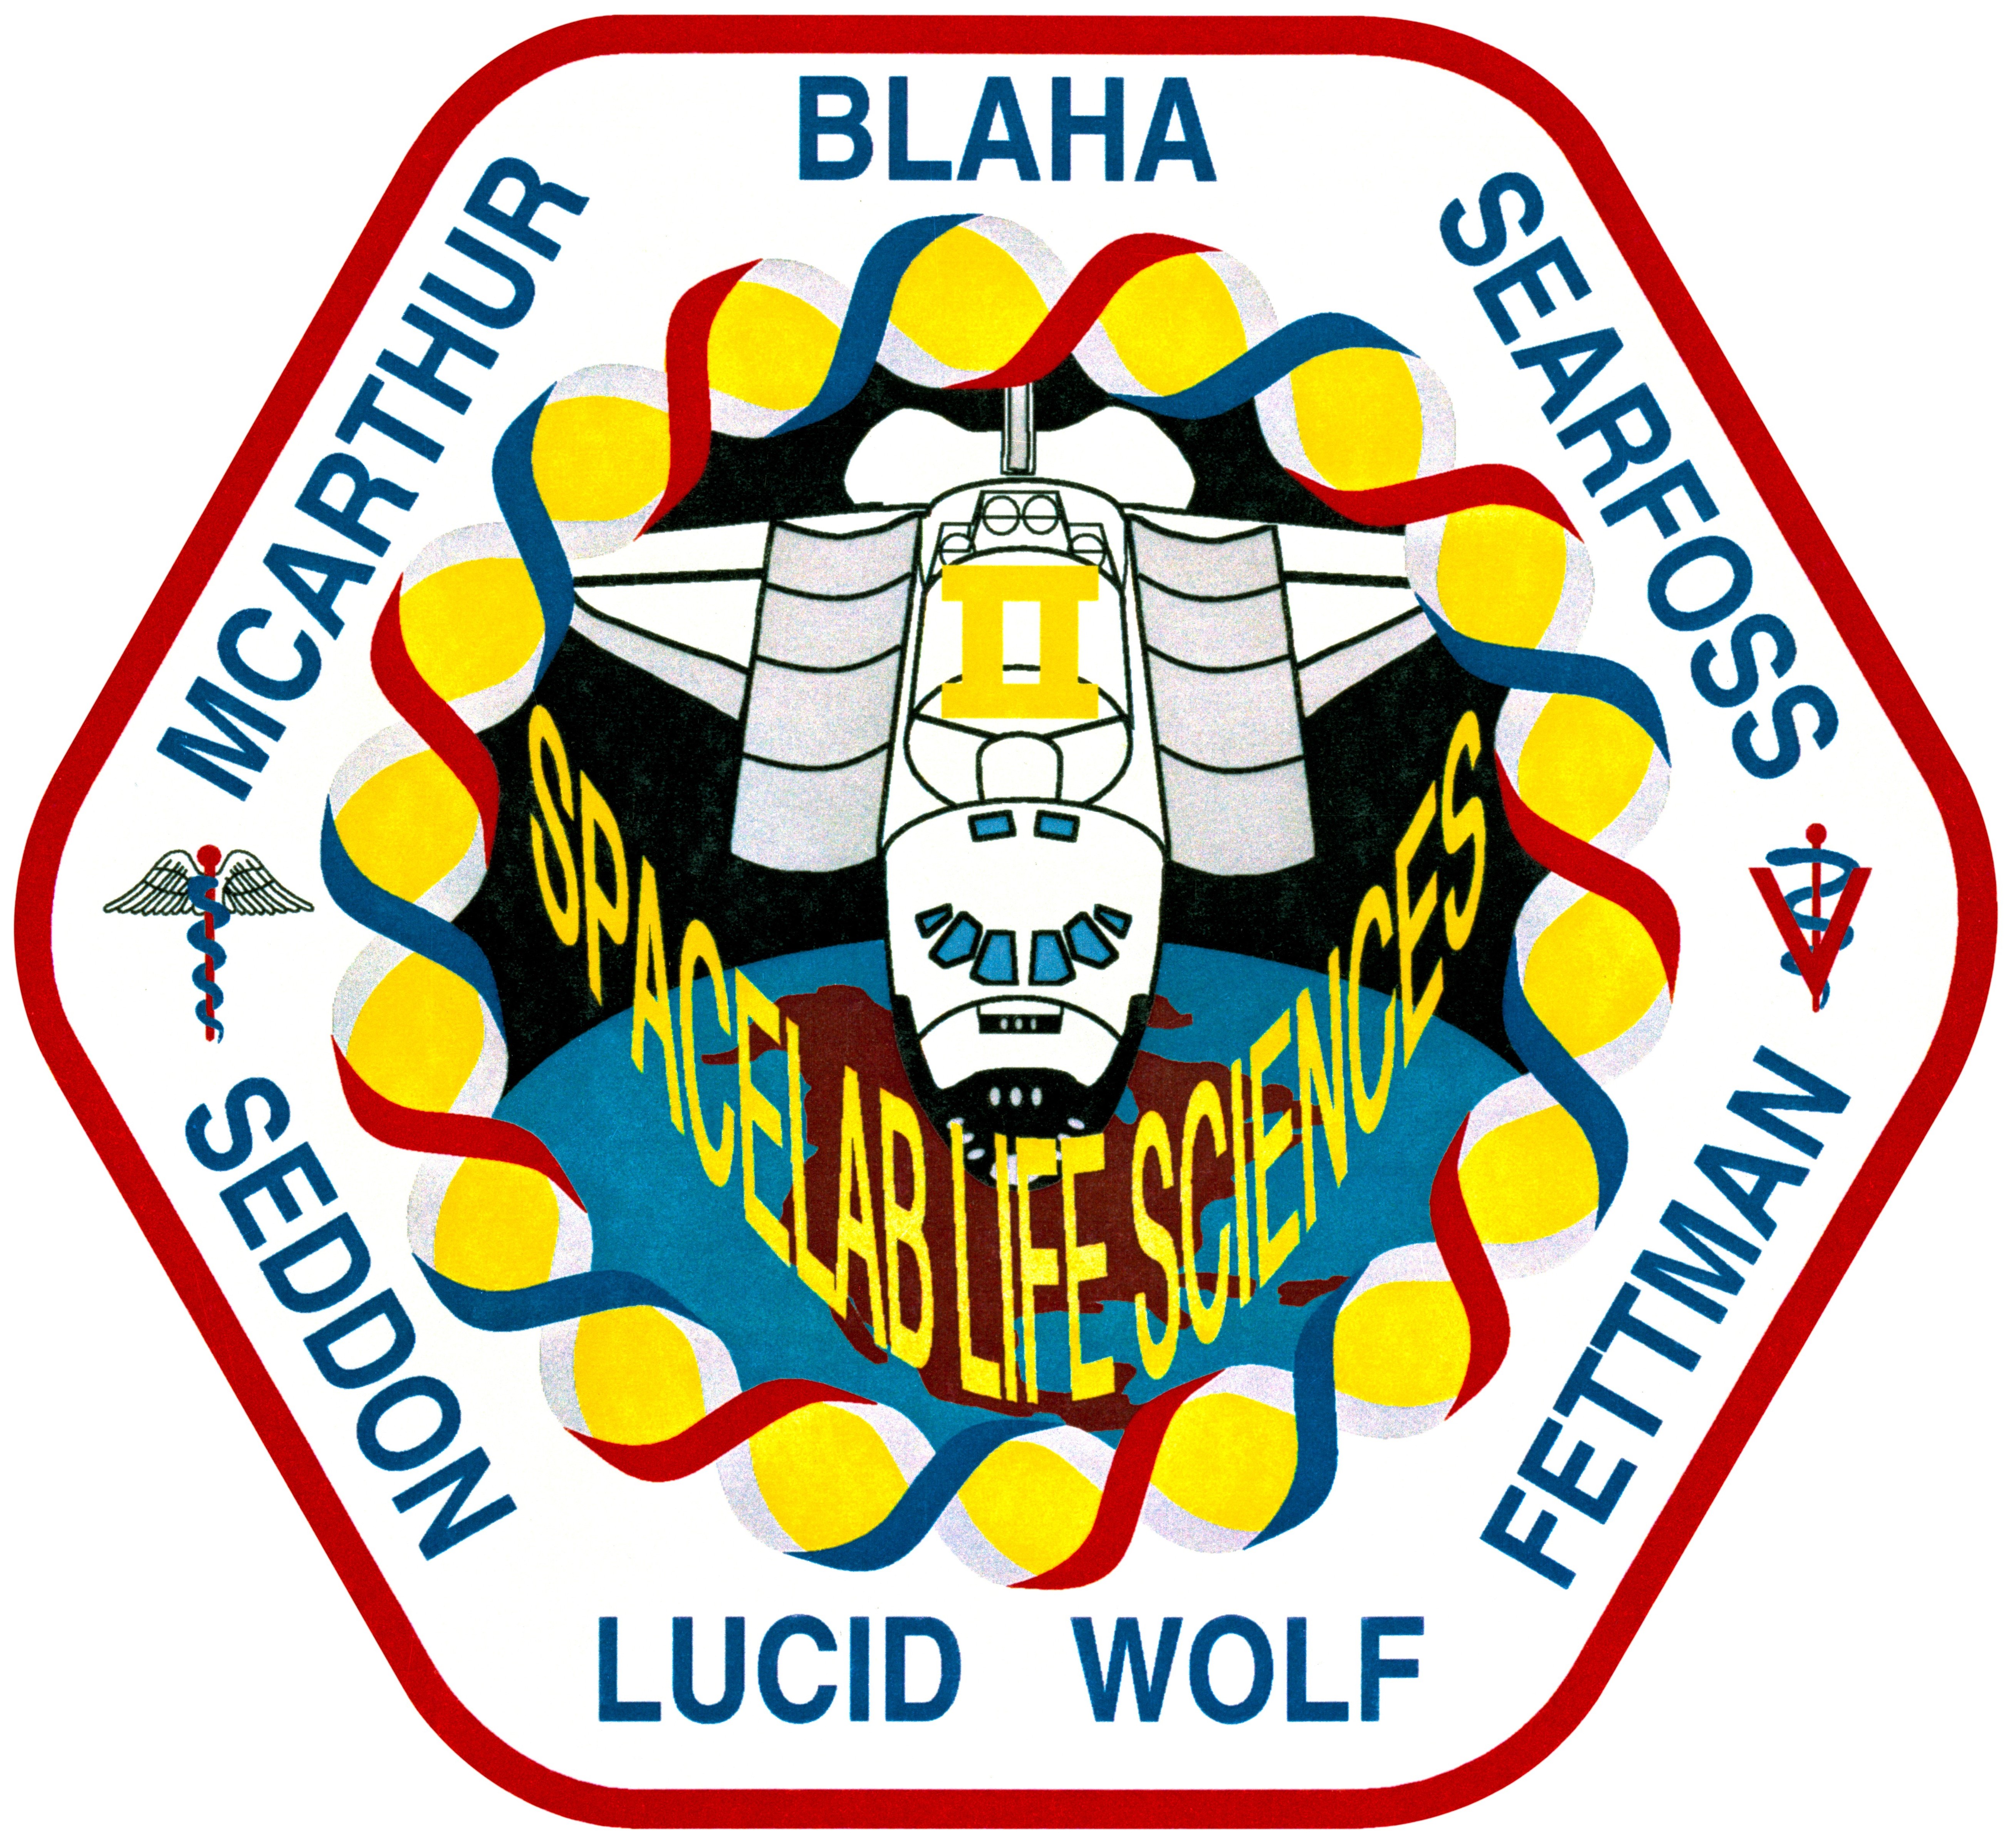 The STS-58 crew patch